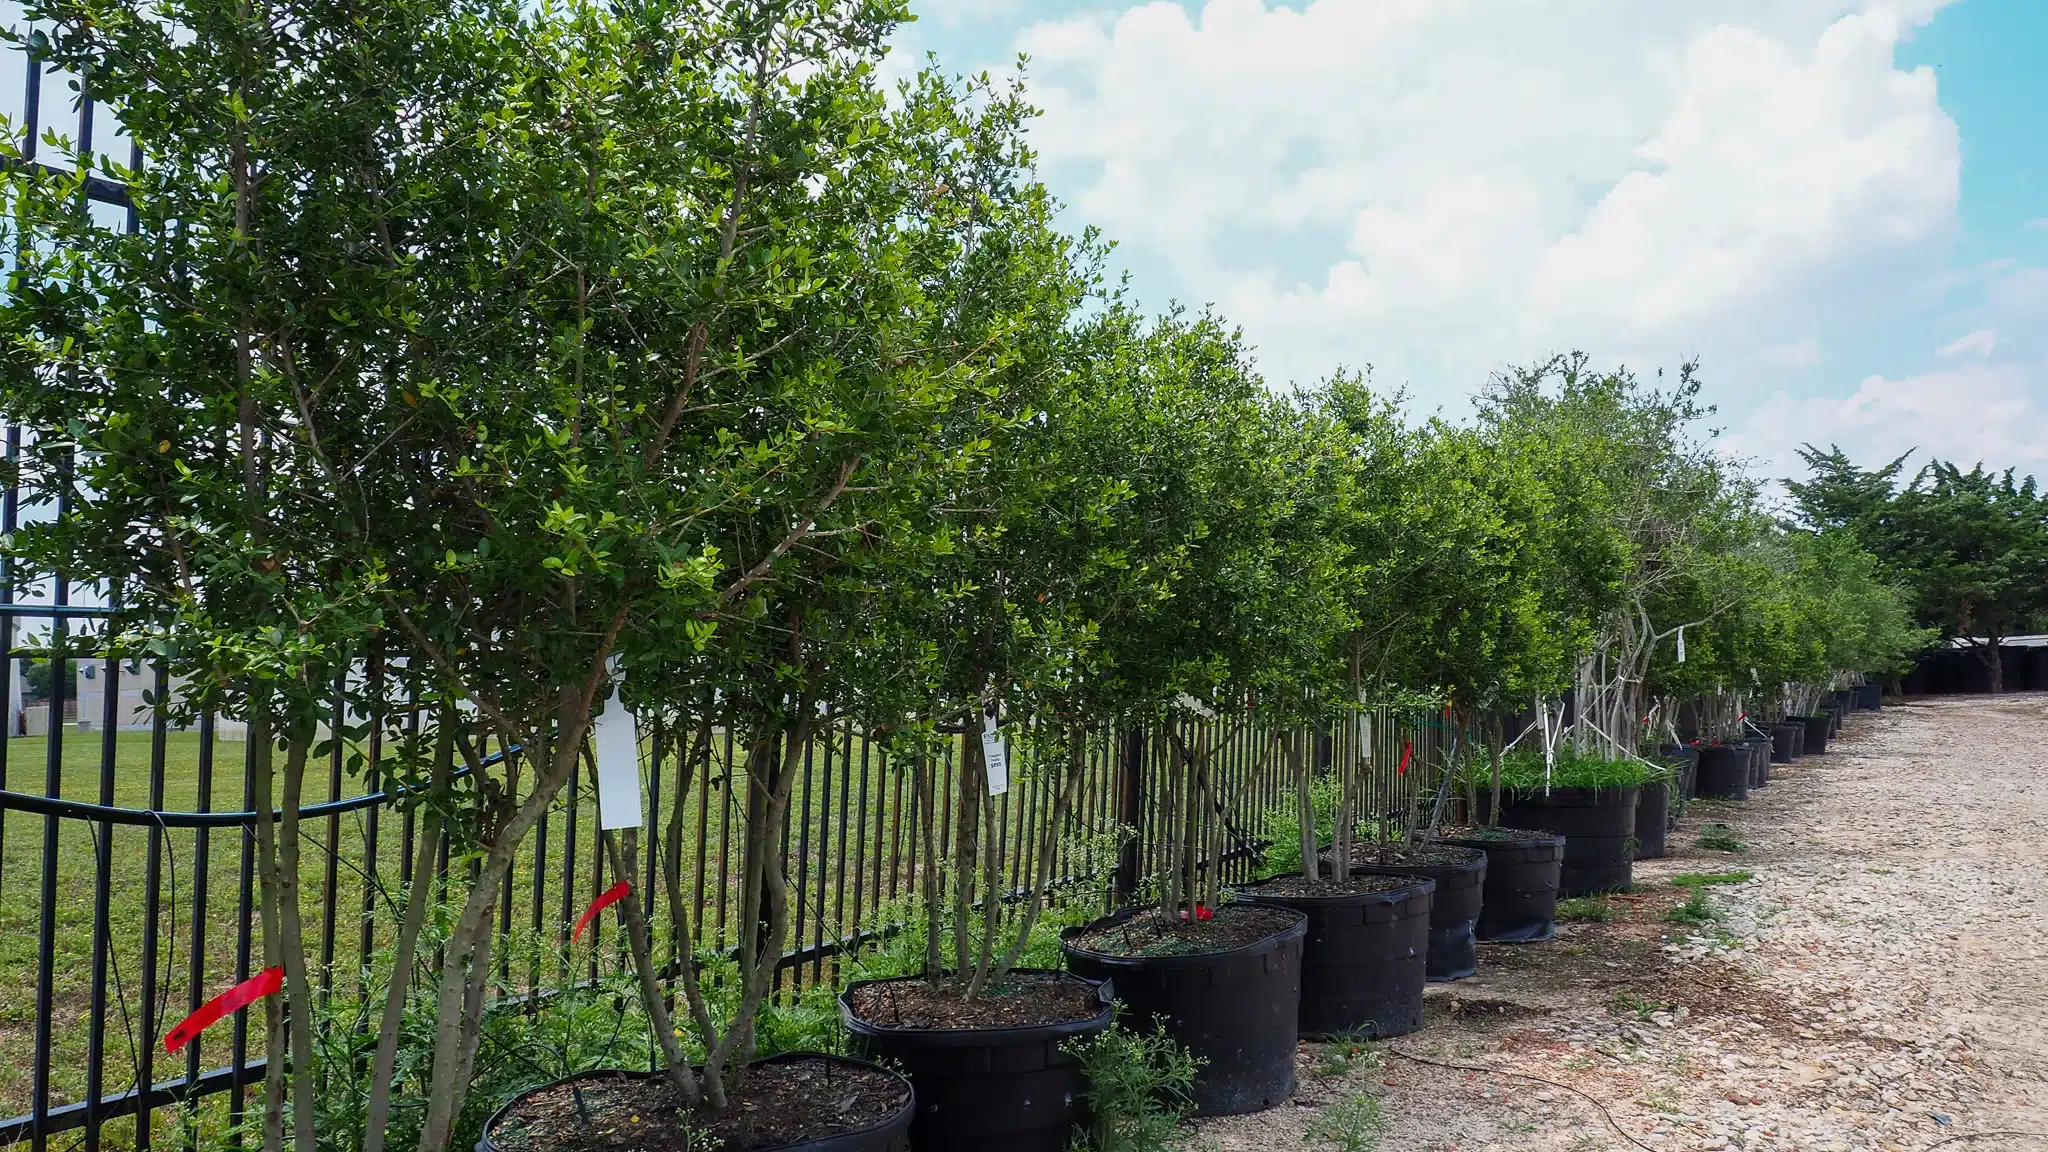 Yaupon Holly Trees for Sale